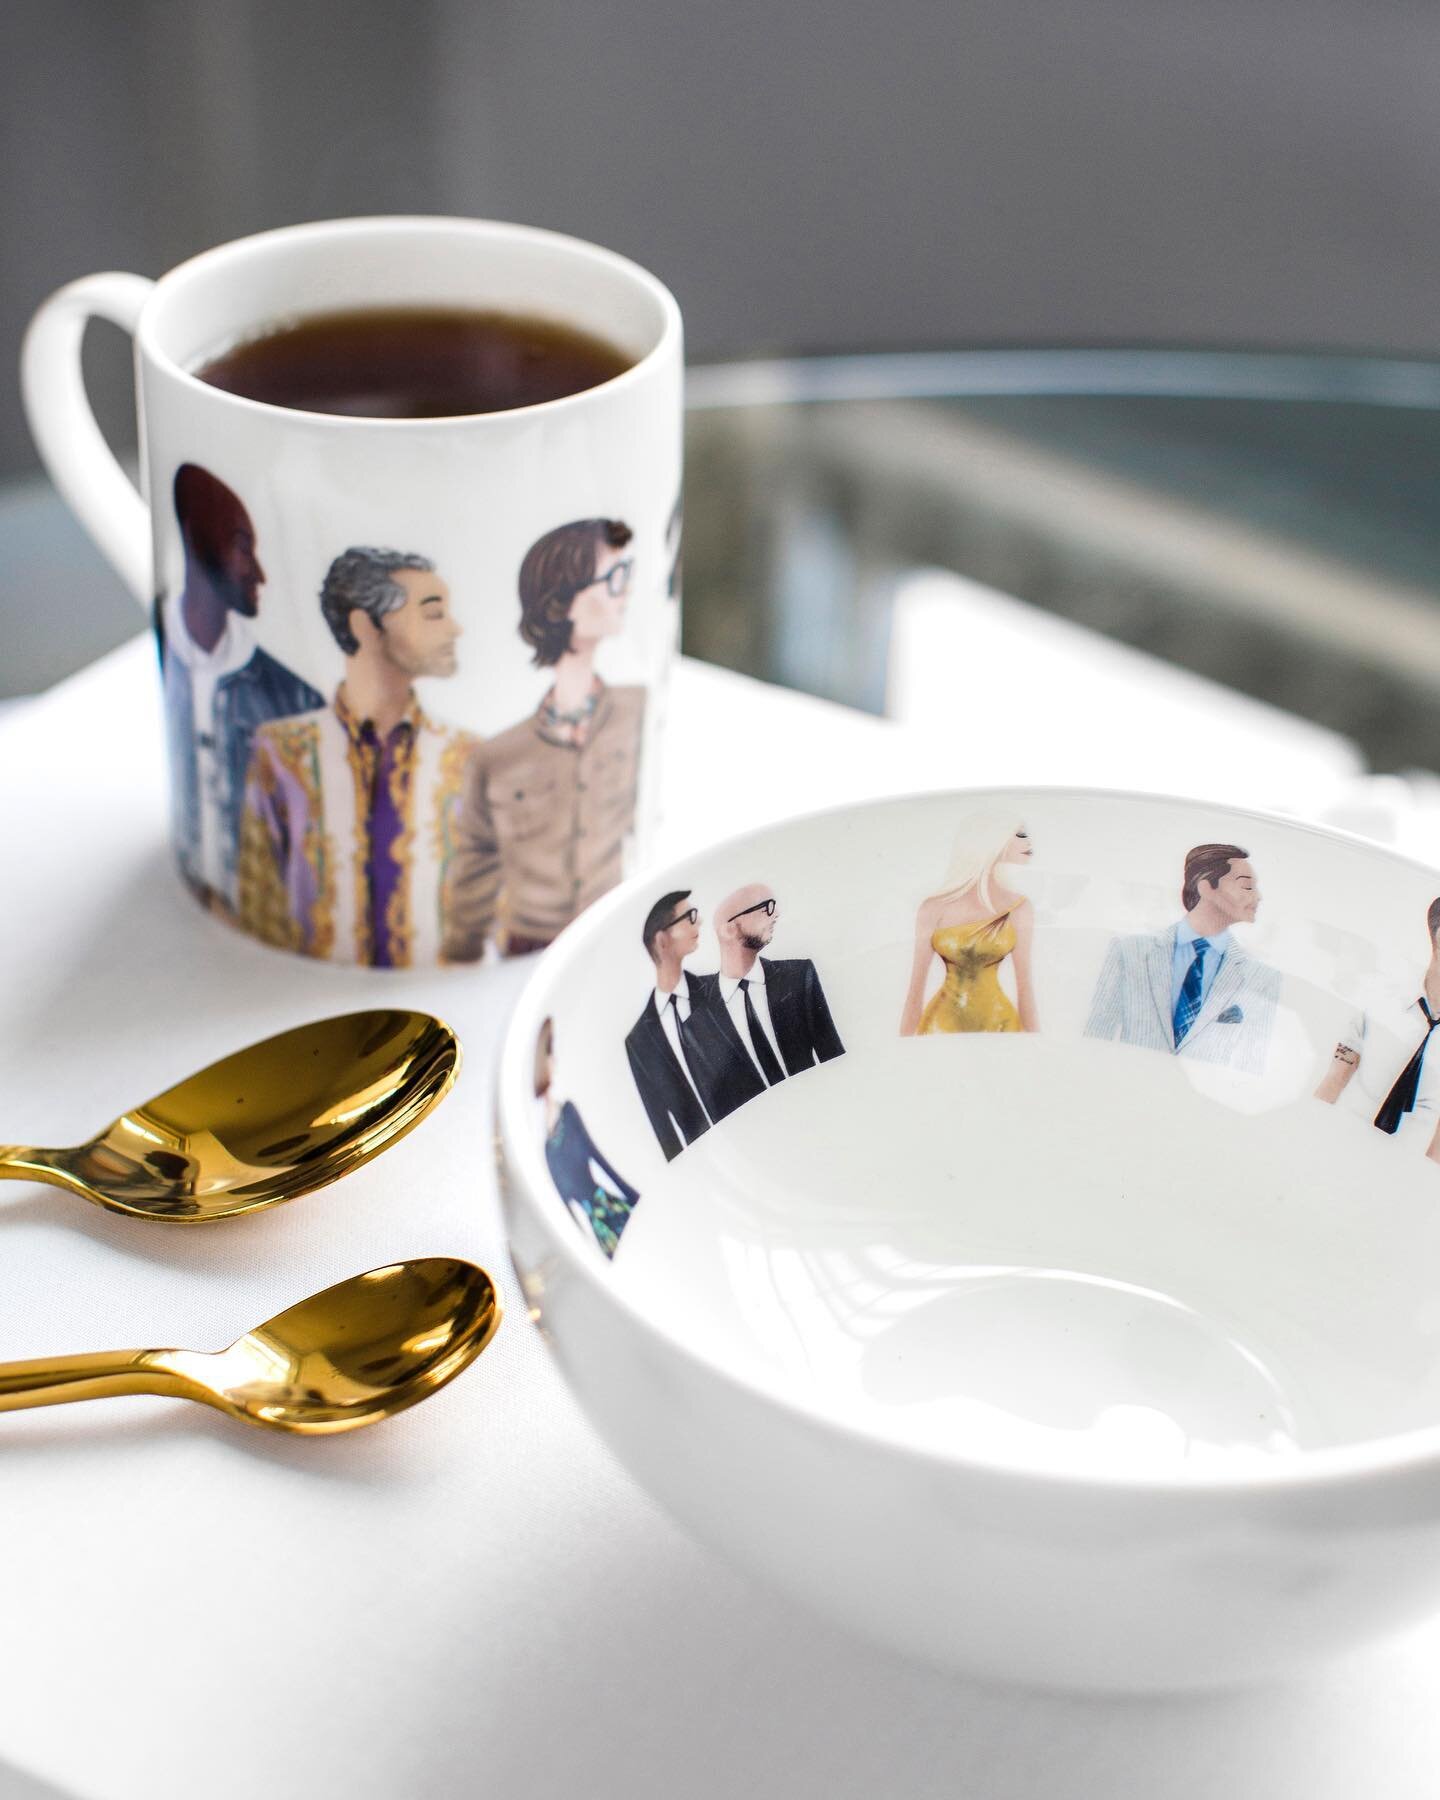 You can purchase our Fine Bone China Fashion Icons collection on whoicons.com (link in bio) ✨
.
.
.
.
.
#finebonechina #luxurytableware #luxurytablesetting #luxurytable #porcelainplate #porcelainplates #porcelainmug #ceramicplate #ceramicplates #past